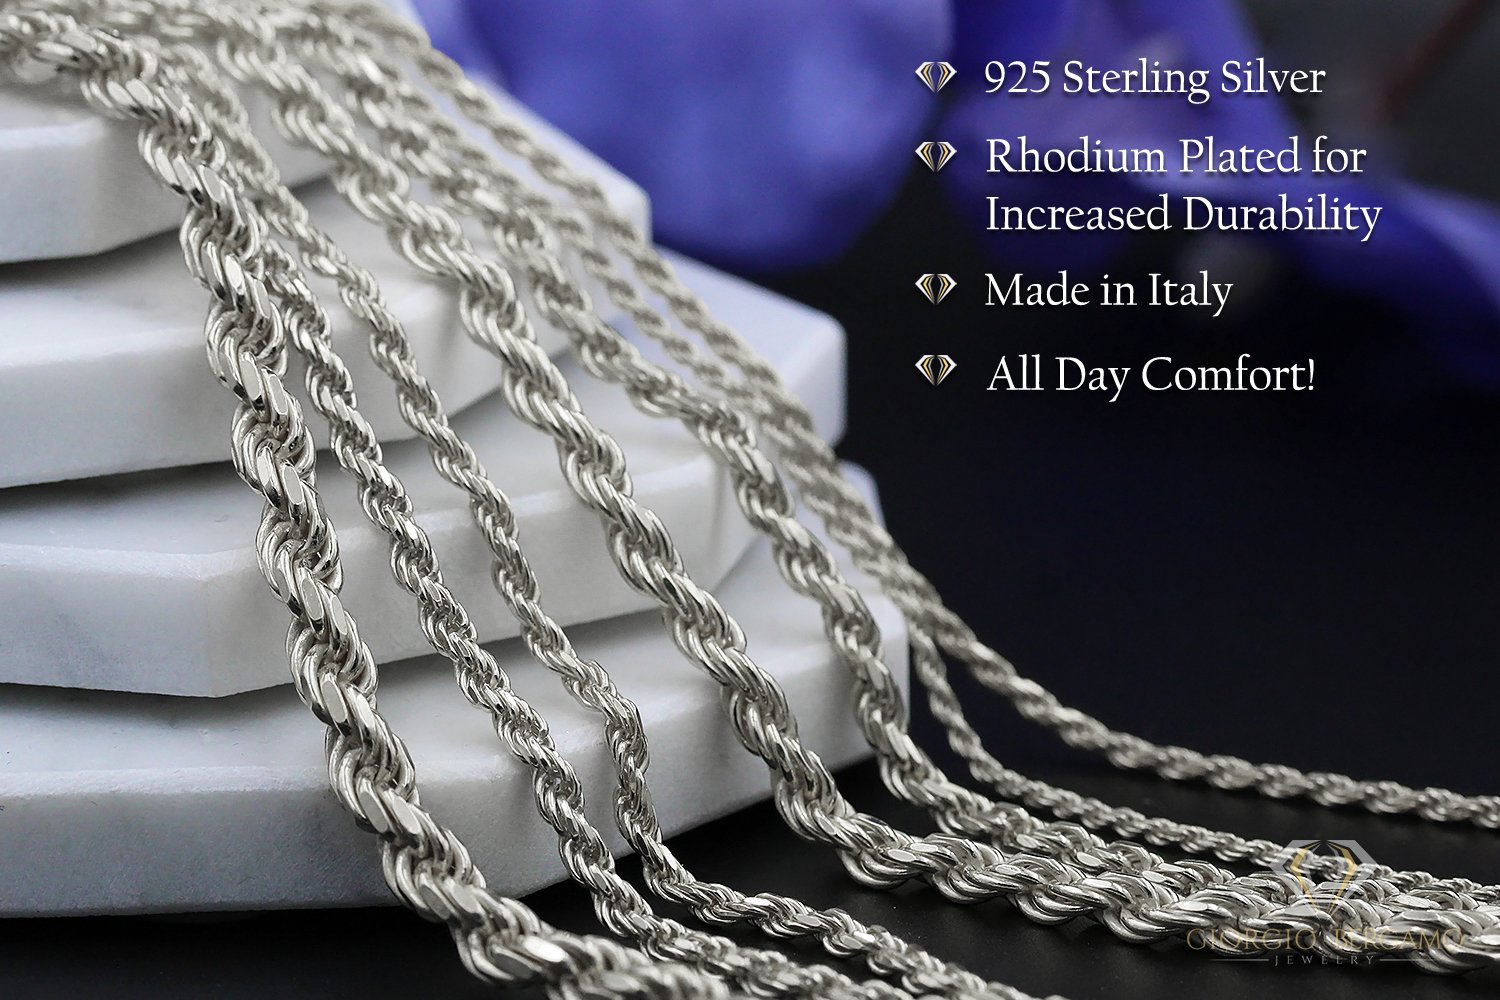 4mm Silver Rope Chain, Silver Chain for Men, Diamond Cut Rope